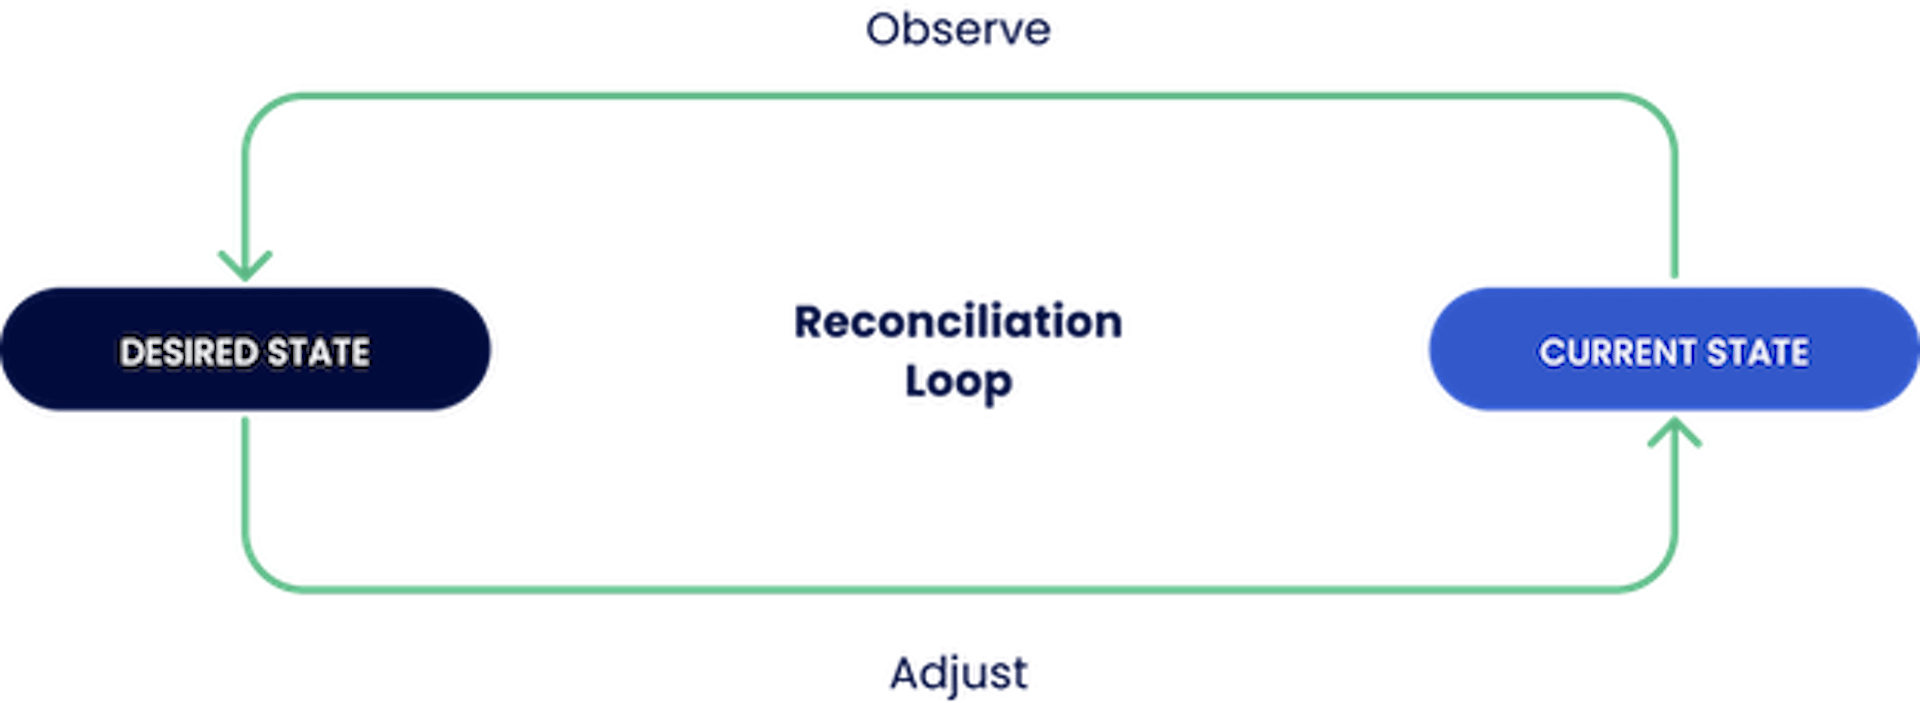 GitOps reconciliation loop current state and desired state